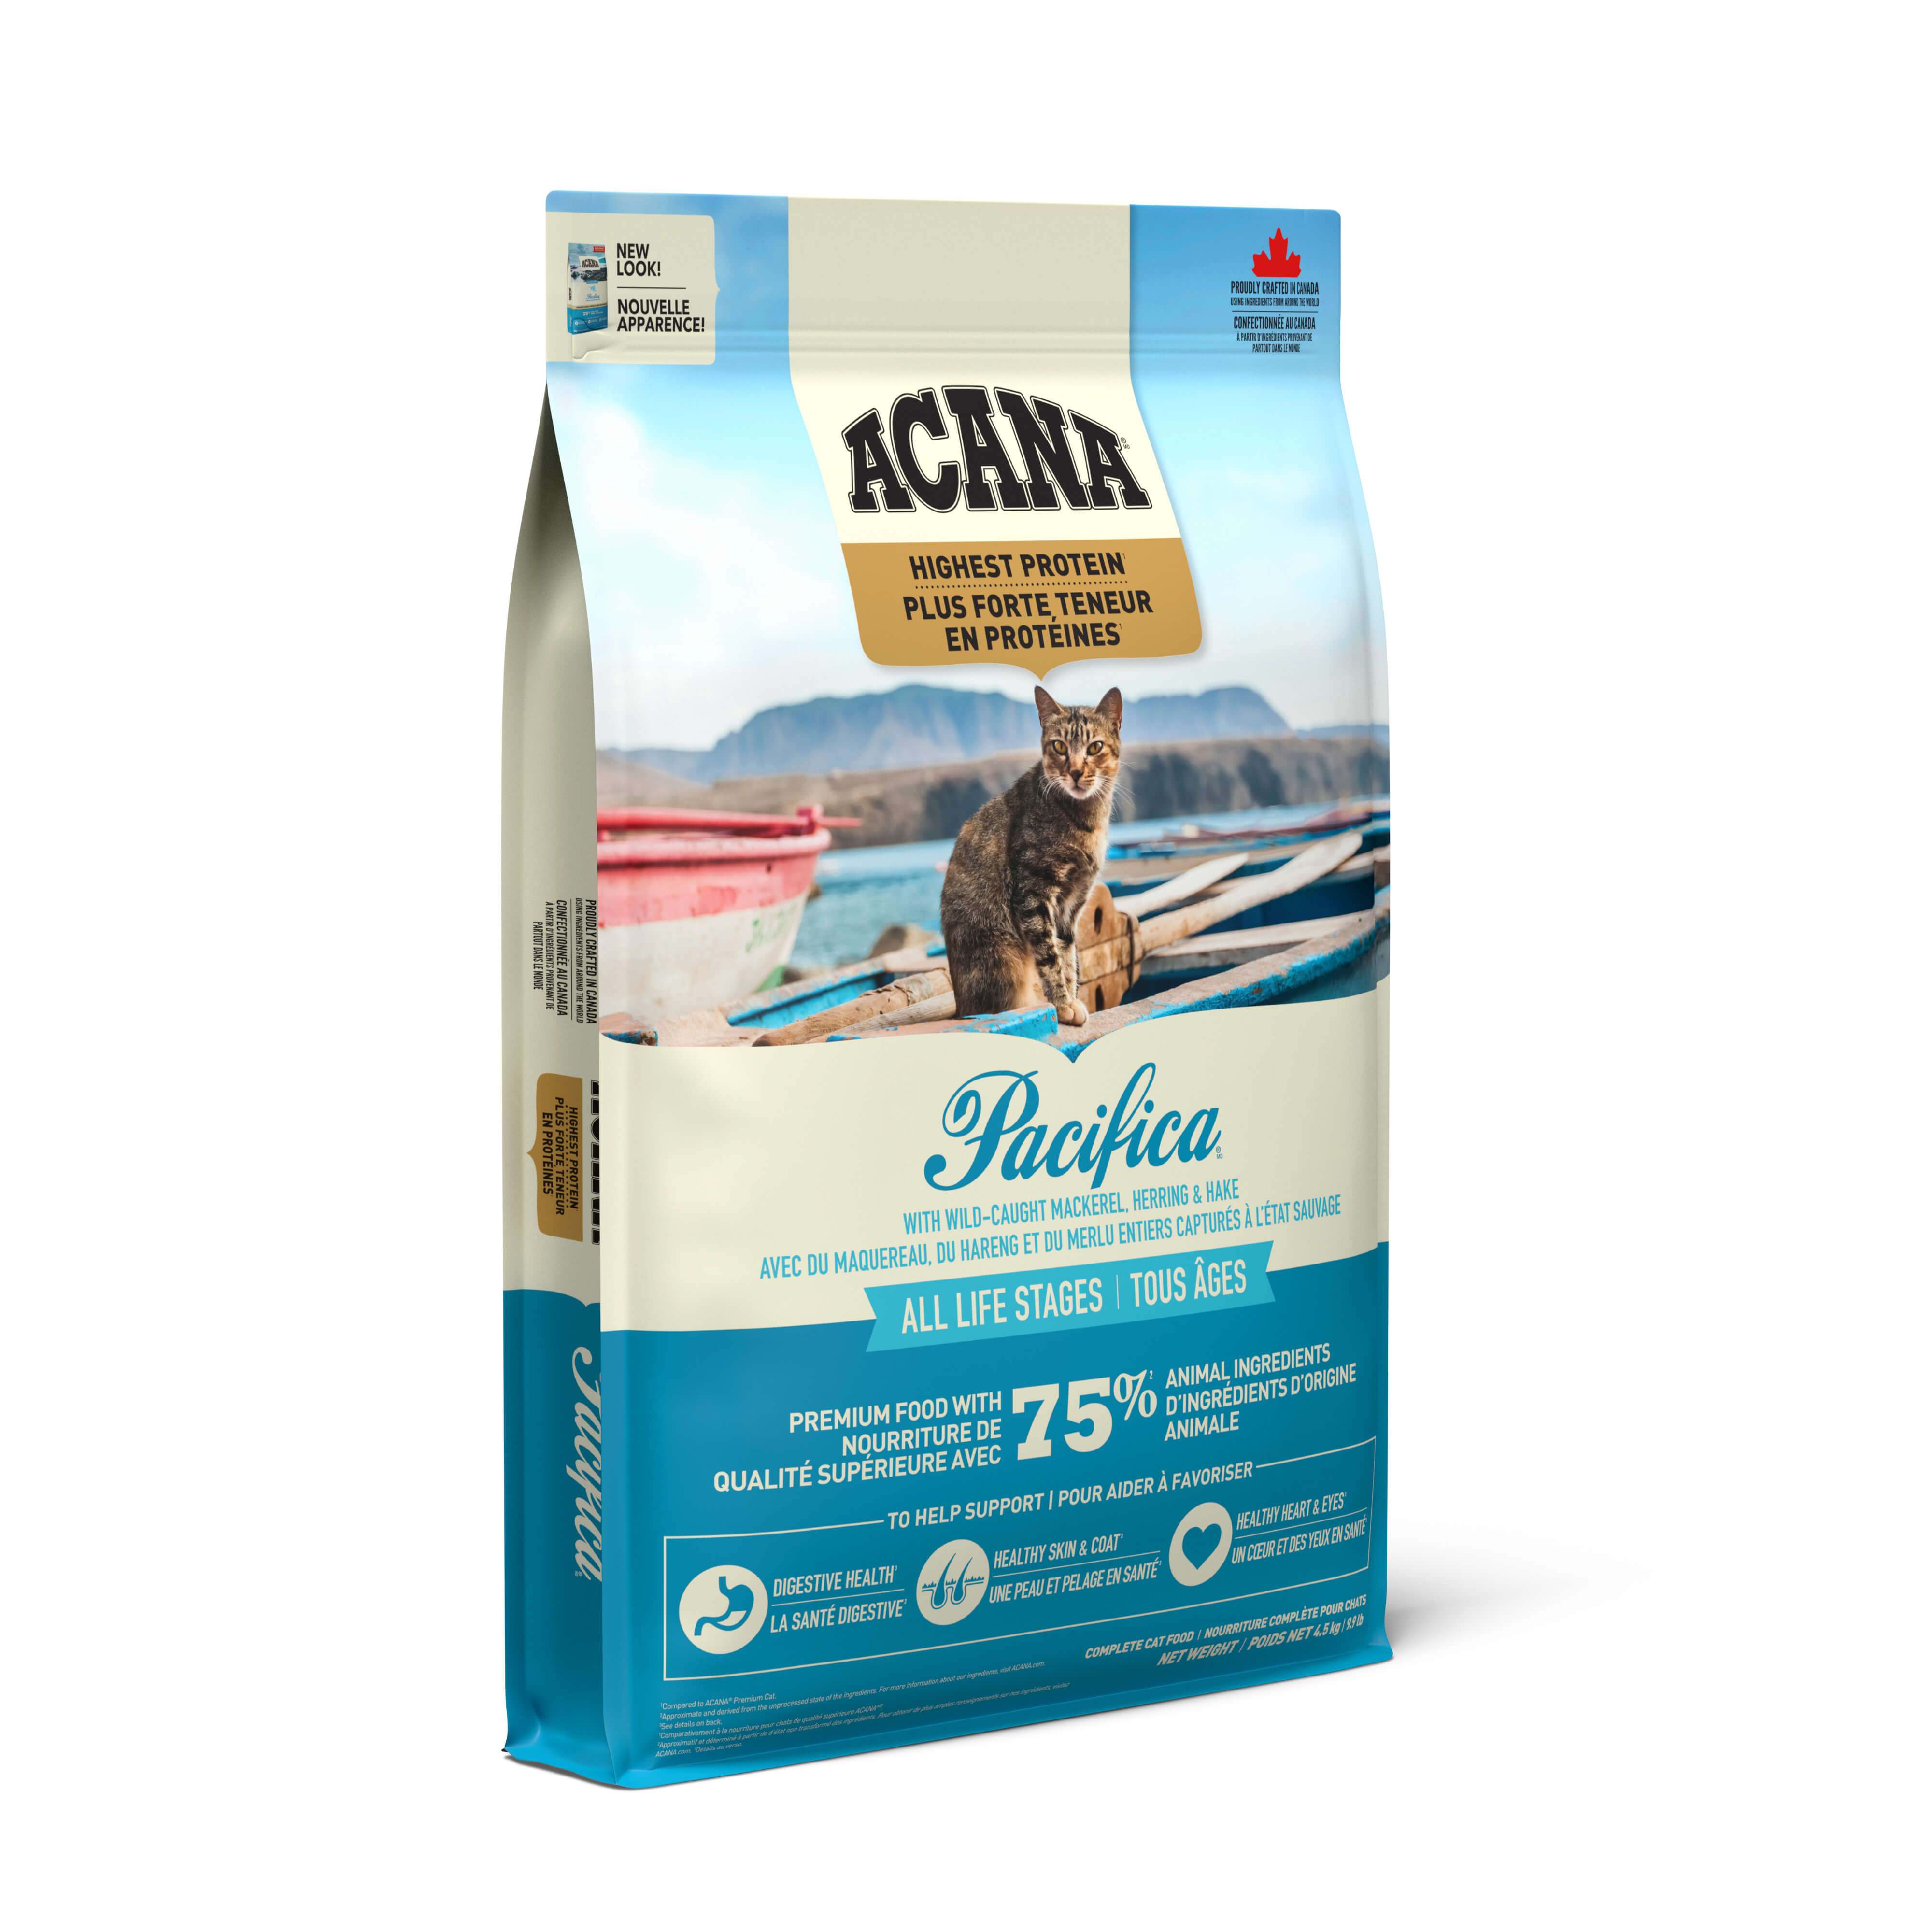 Acana - Highest Protein Pacifica (Dry Cat Food)